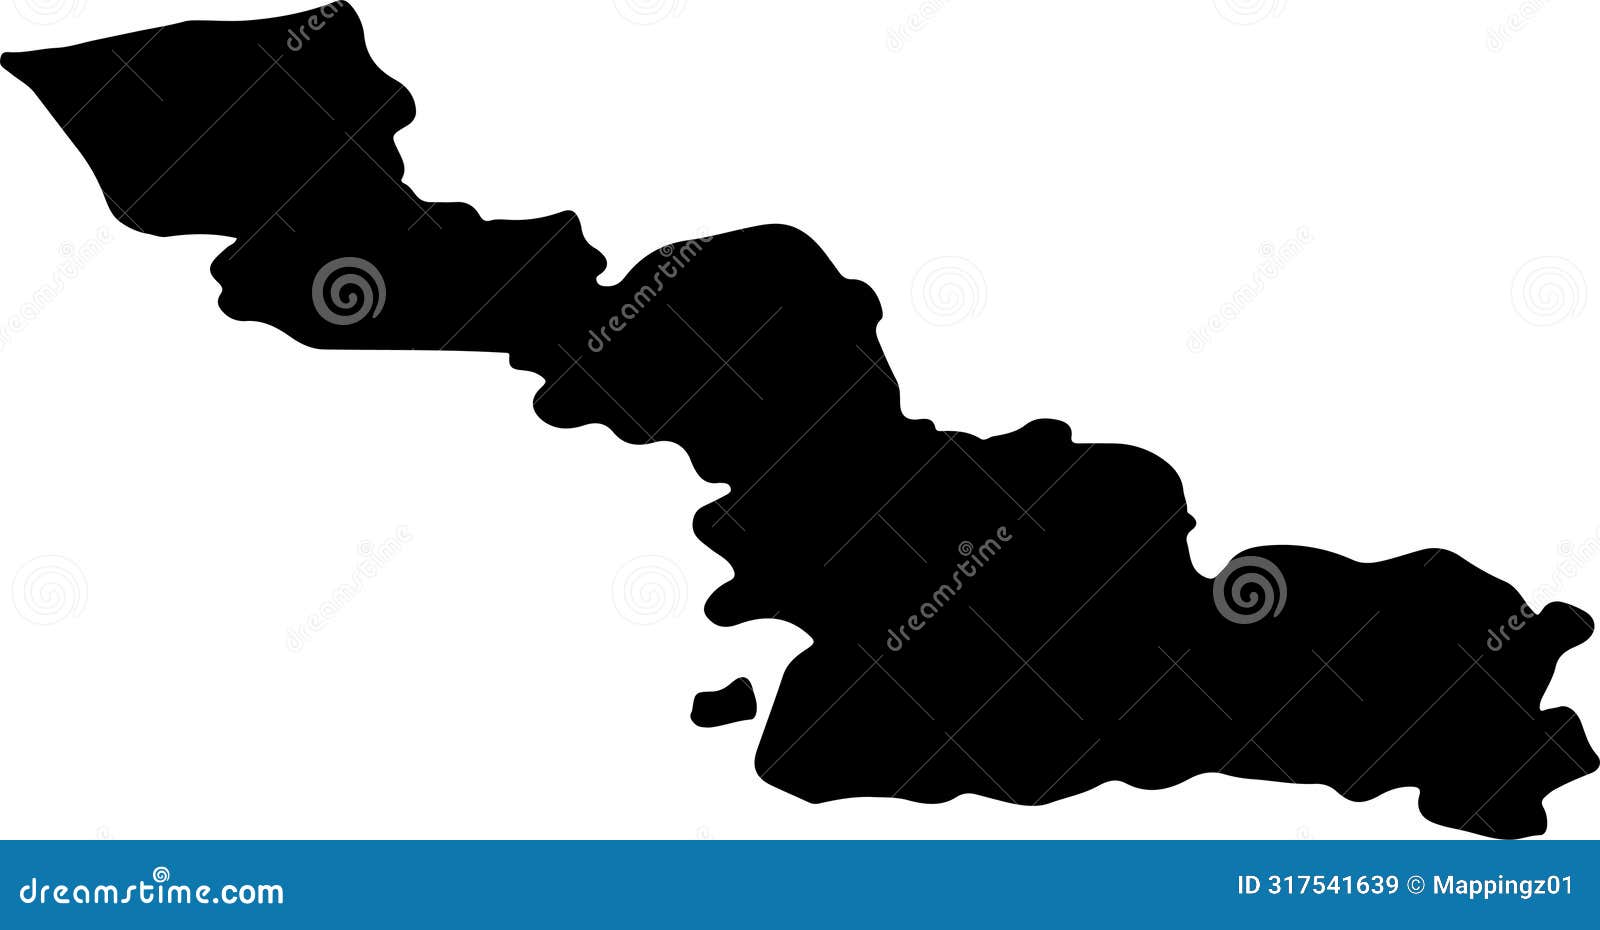 nord france silhouette map with transparent background